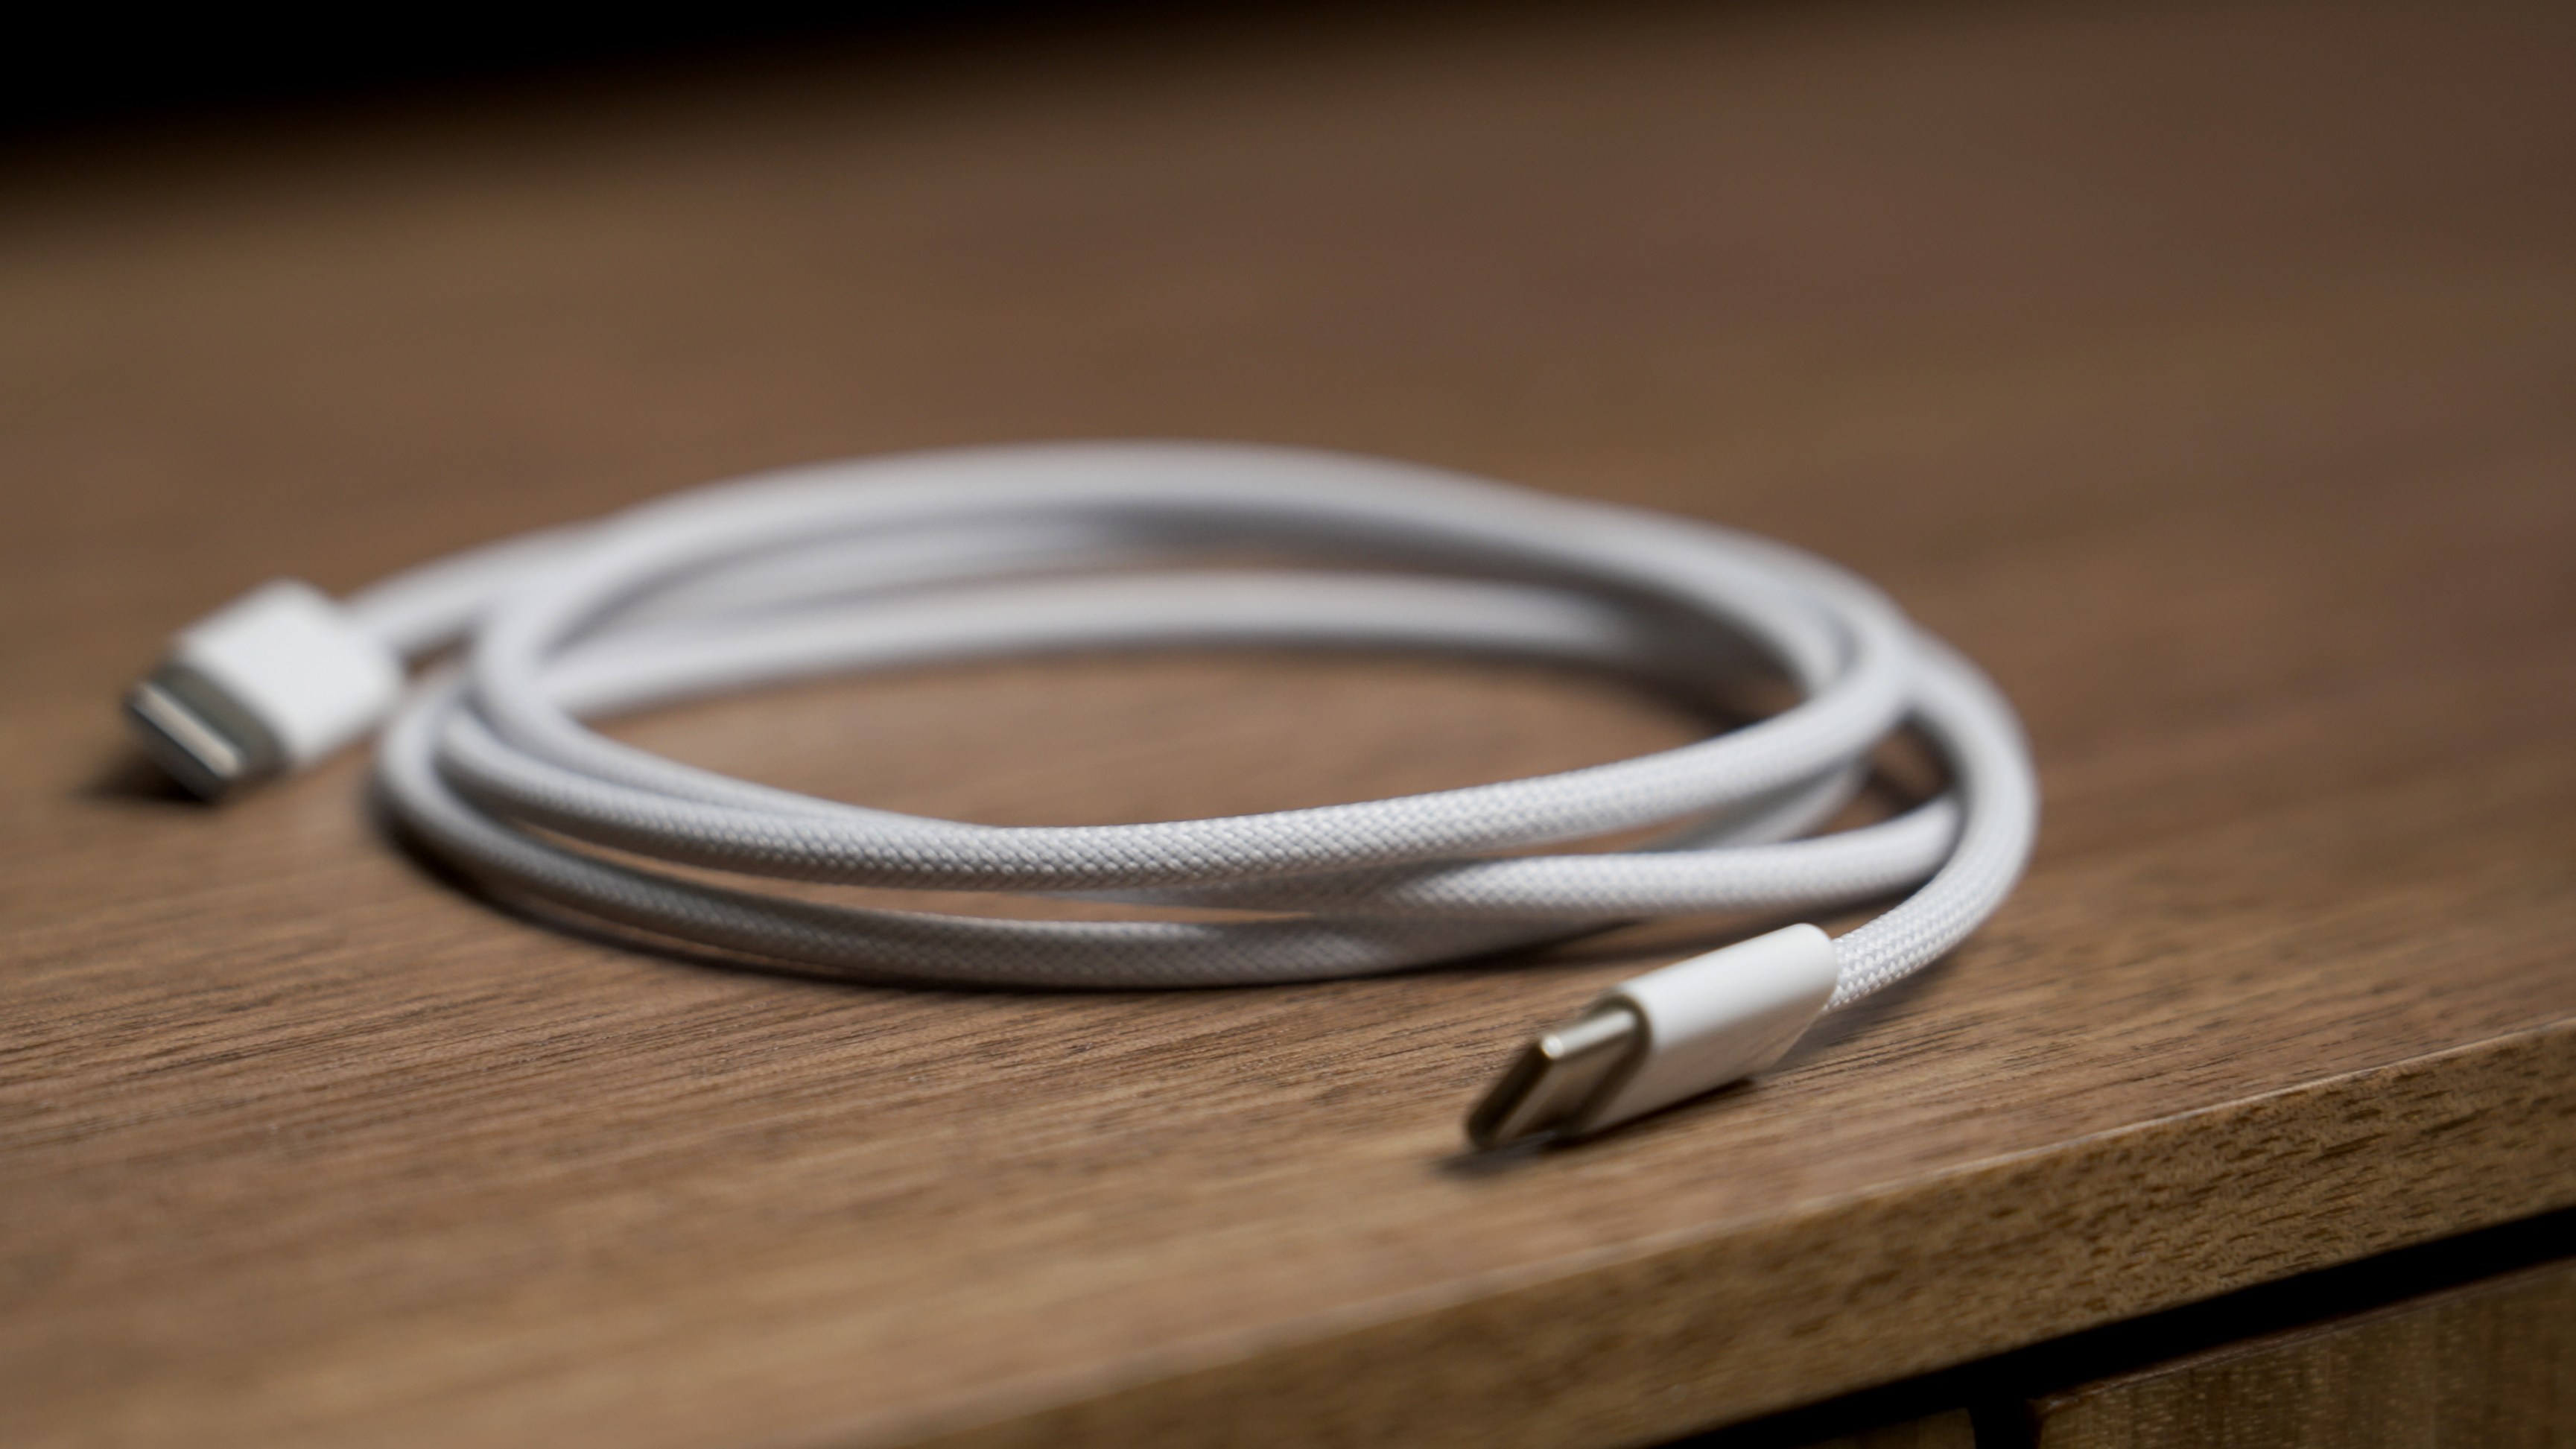 Apple Ear Pod USB-C Fast Review - Audio Quality and Galaxy S23